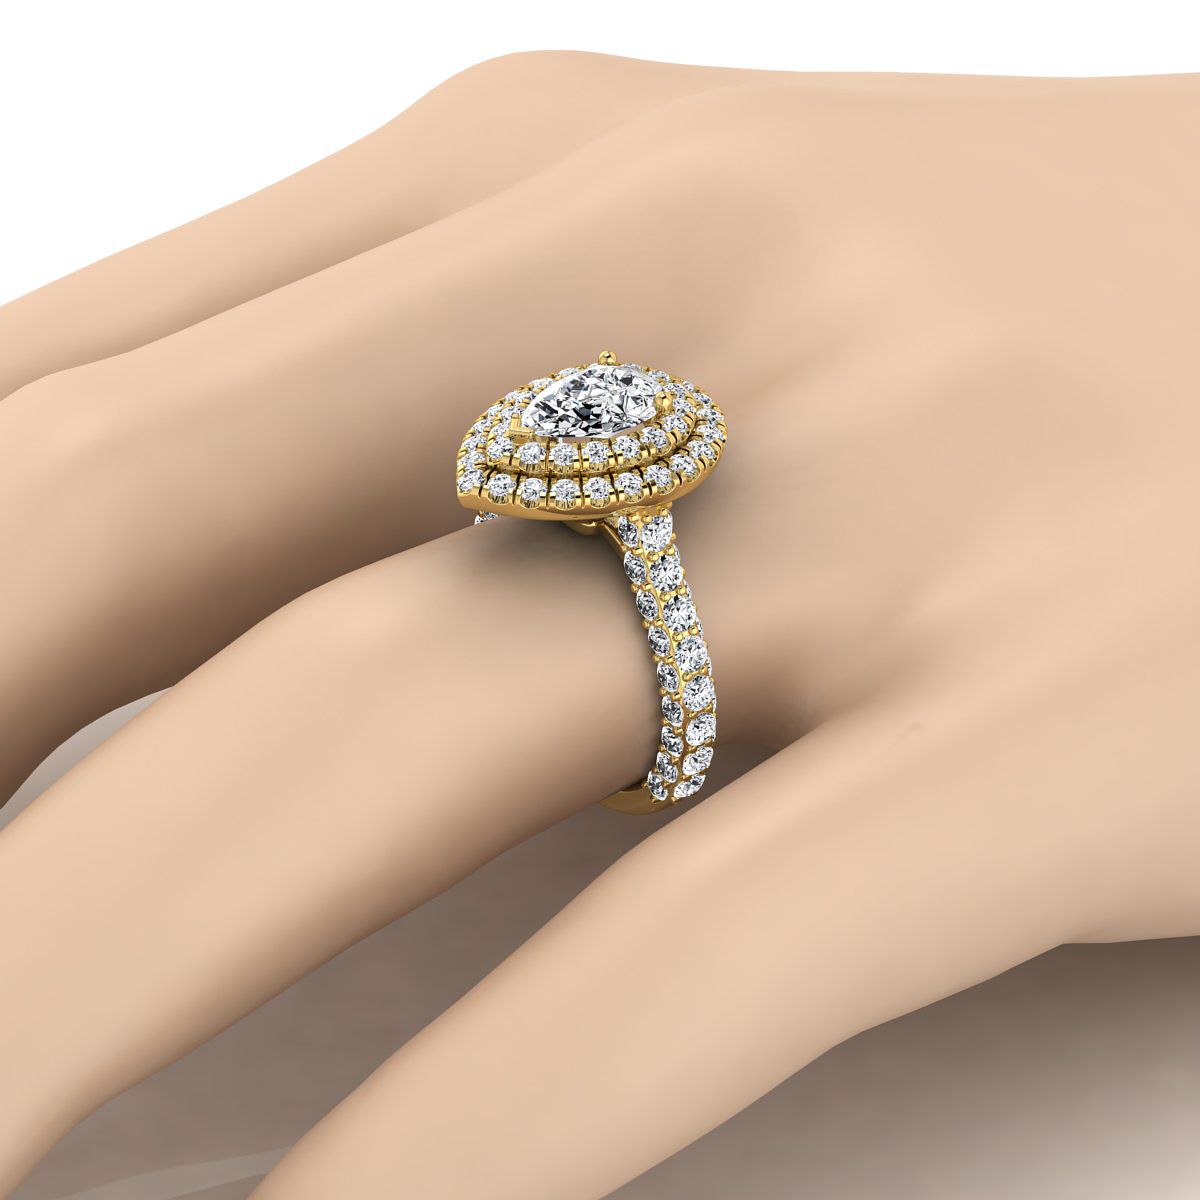 18K Yellow Gold Pear Shape Center Diamond Bold and Fancy Double Halo French Pave Engagement Ring -2ctw